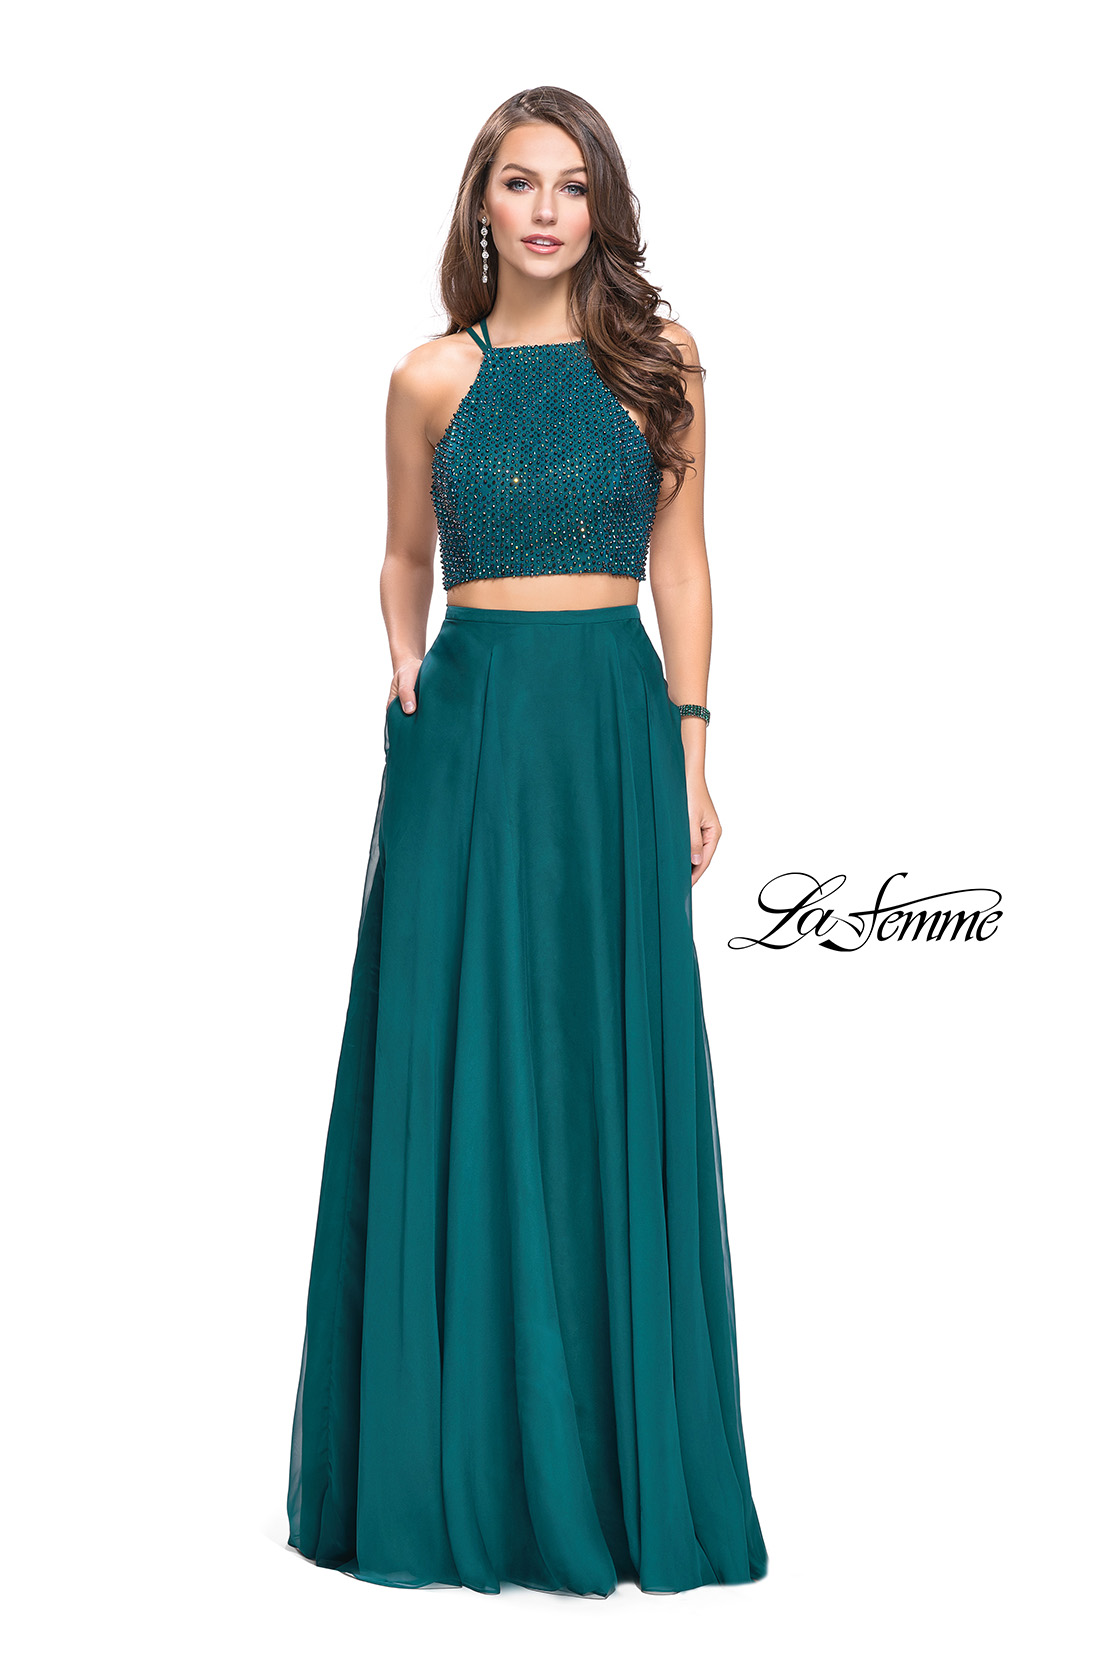 Latest chiffon gown styles 2022, two pieces chiffon styles for ladies